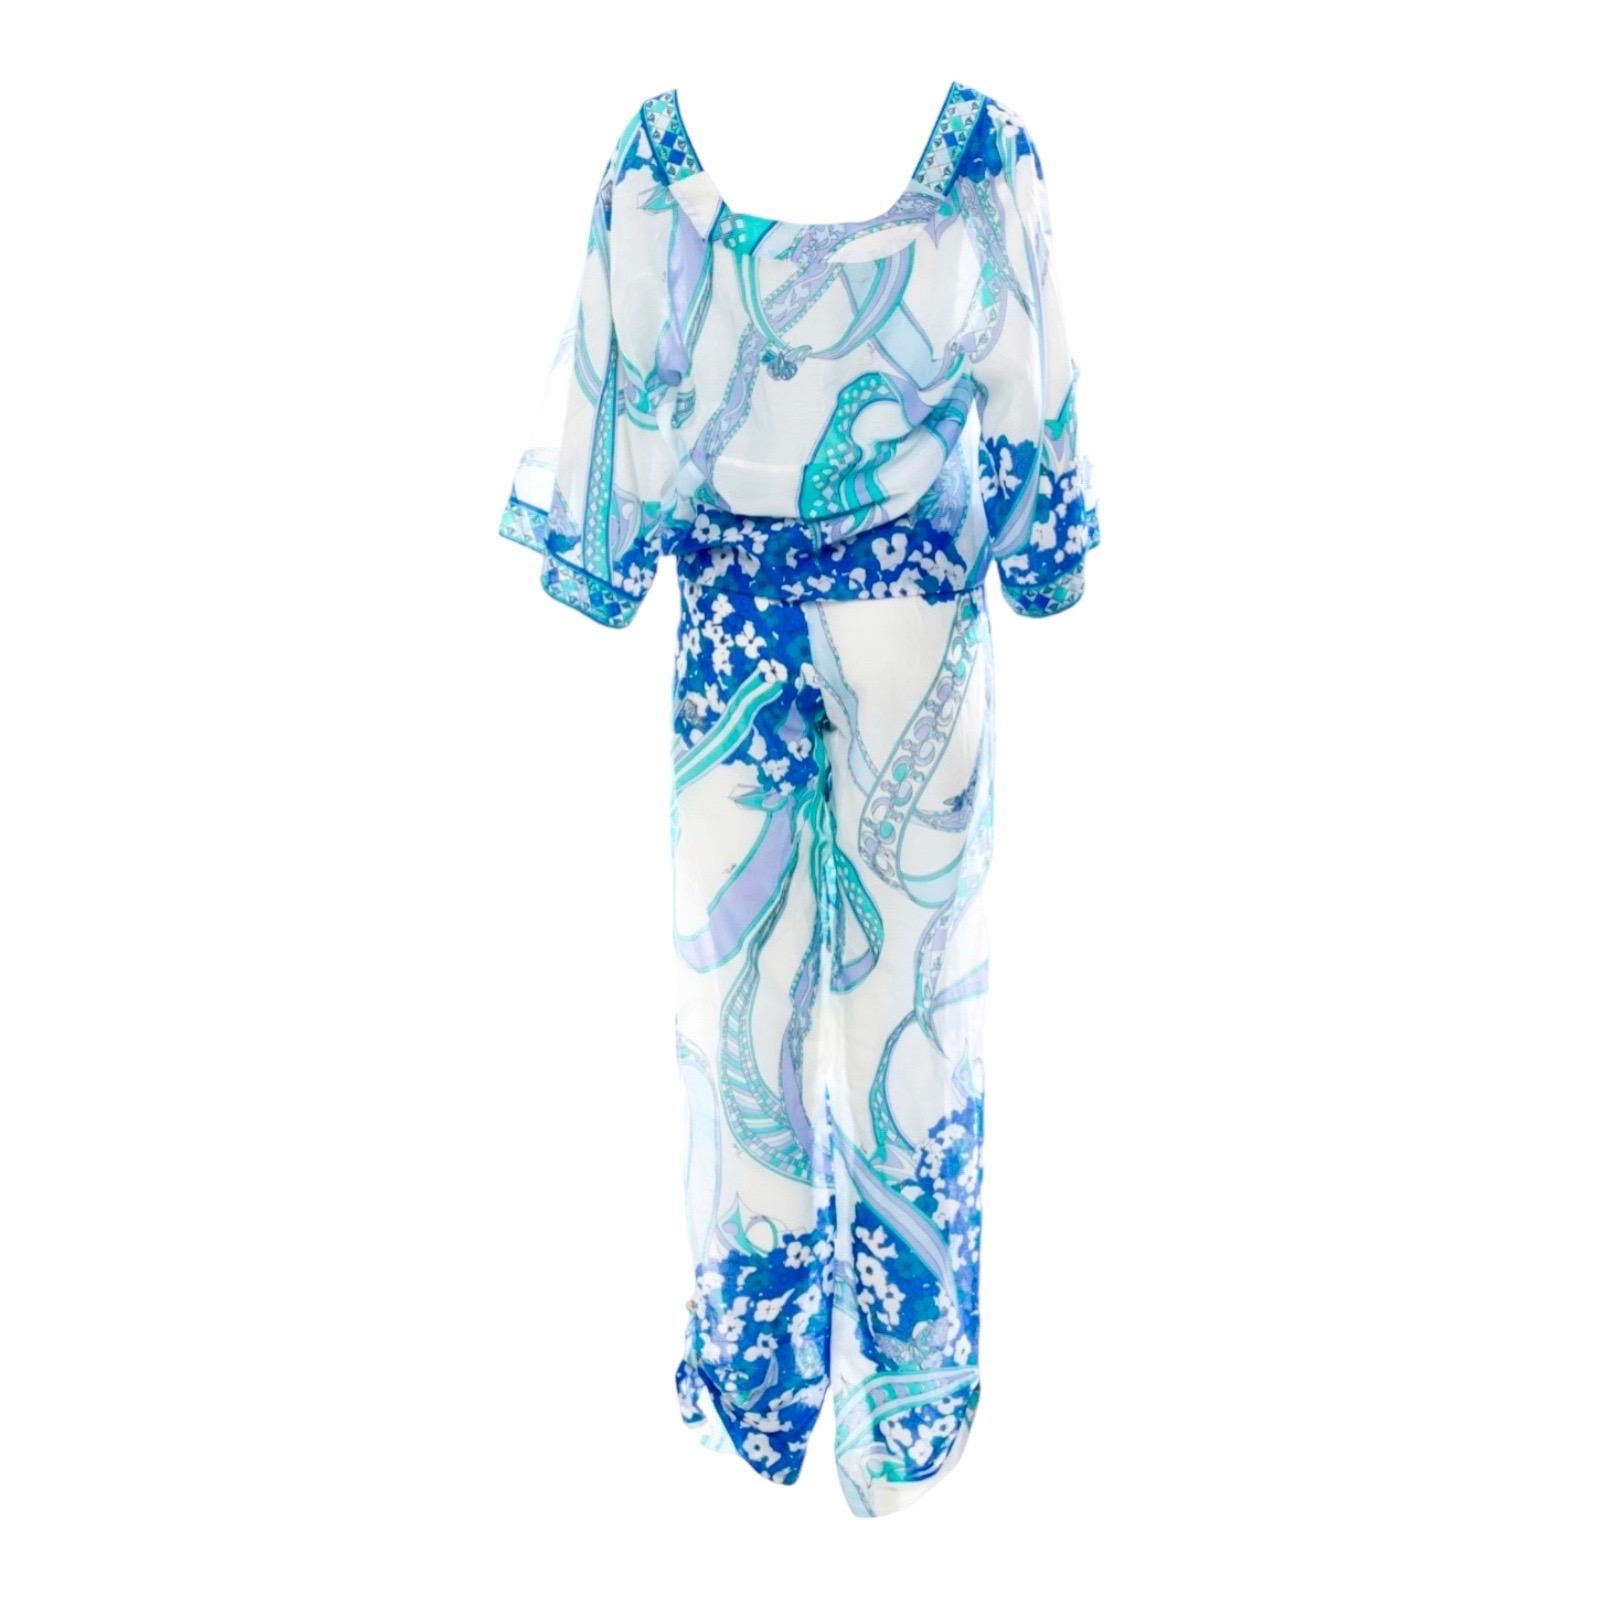 Gorgeous EMILIO PUCCI jumpsuit
Finest signature print silk voile discreetly signed with 